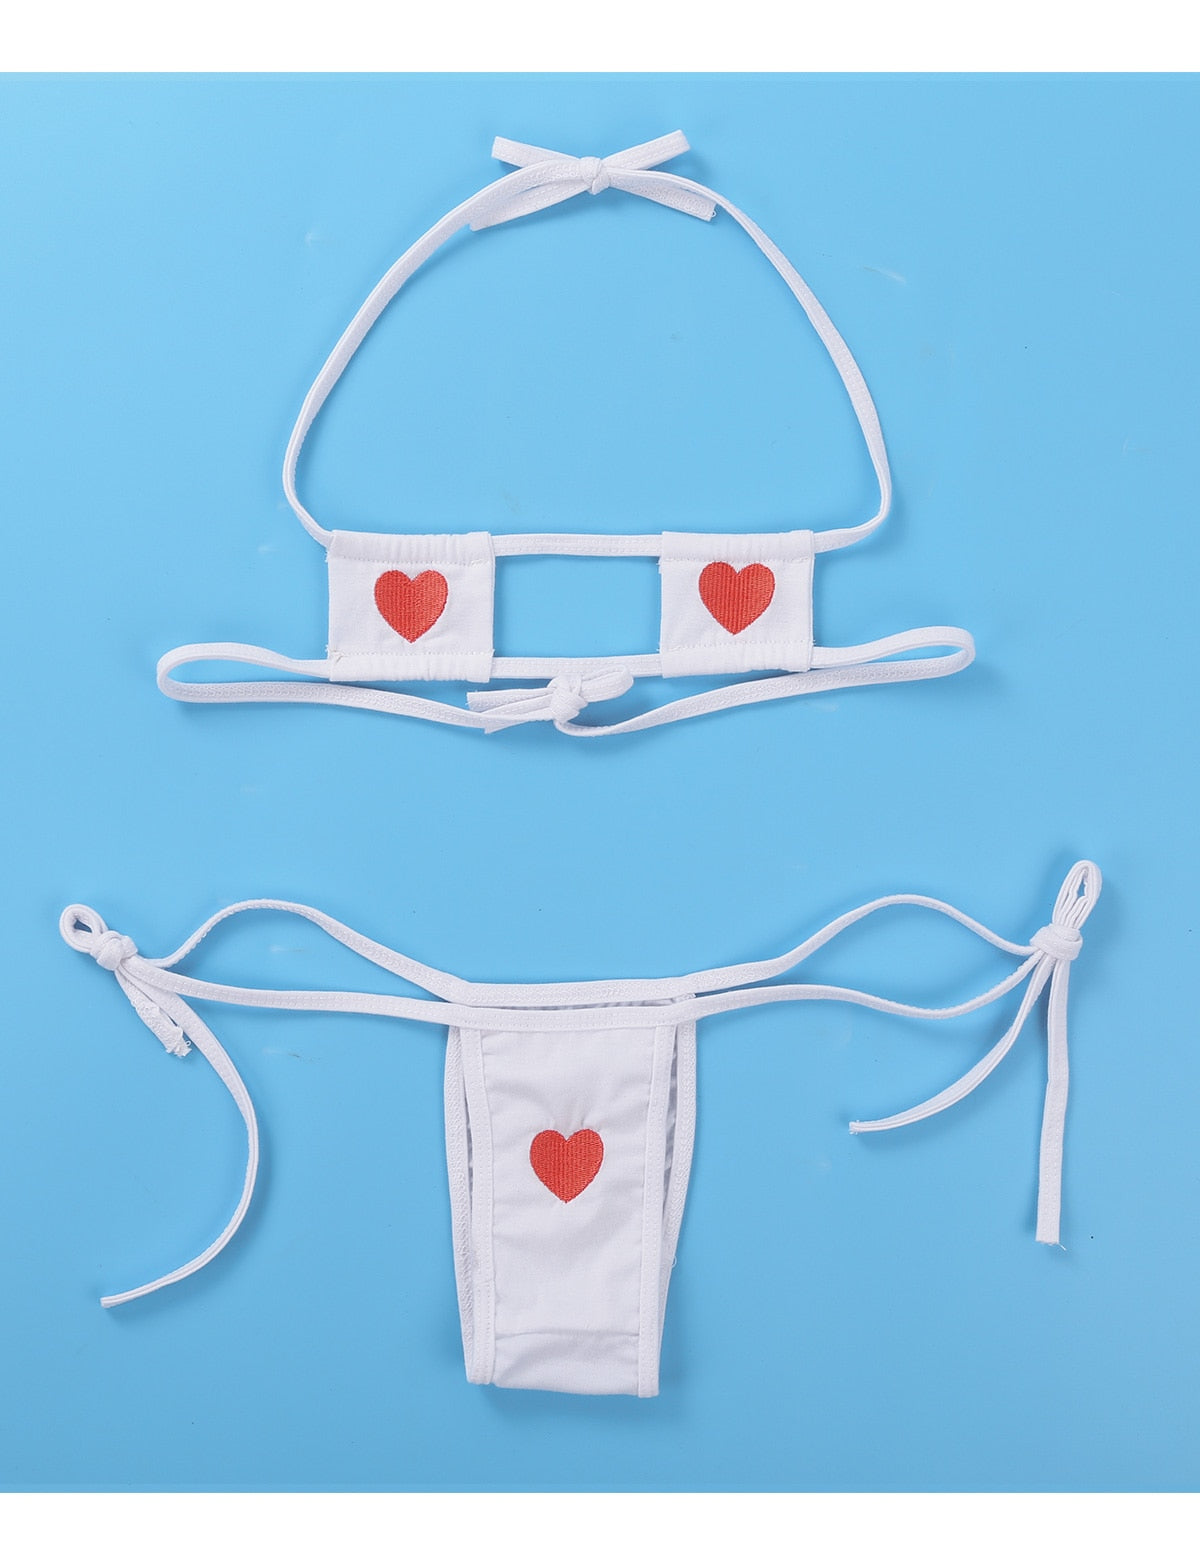 Summer Striped Heart Embroidered Cosplay Mini Bikini Lingerie Set Self Tie Square Bra Top with Briefs The Clothing Company Sydney